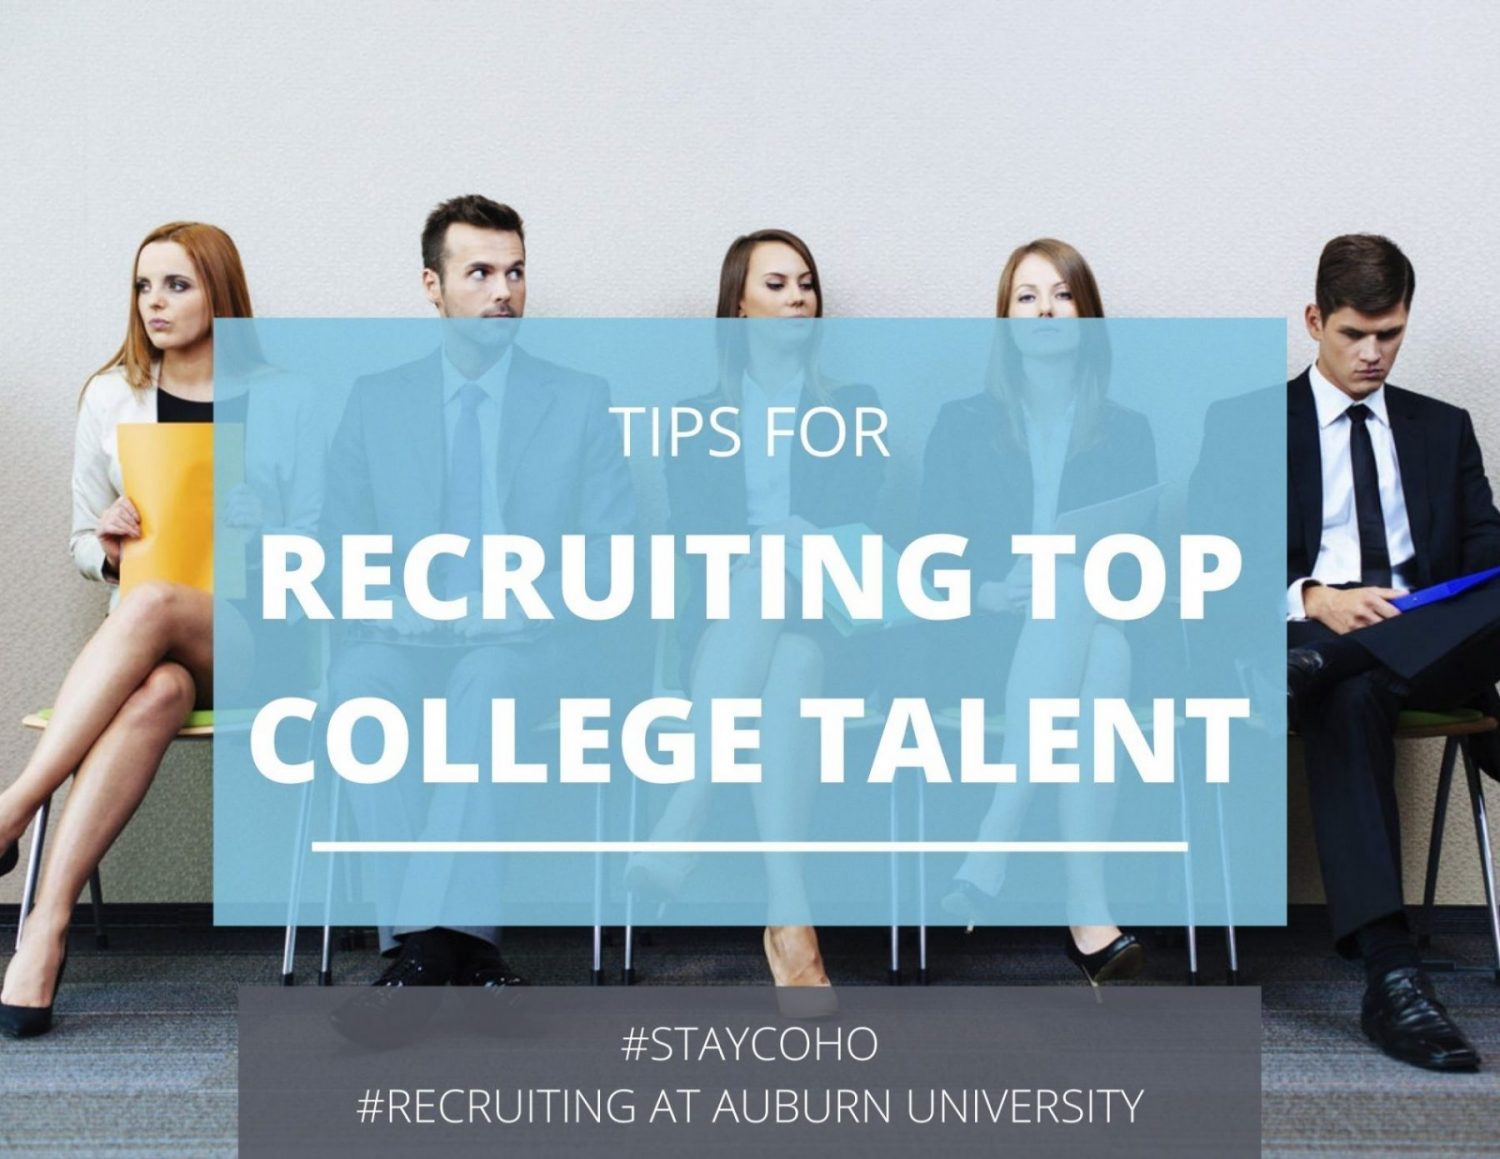 Tips for recruiting top college talent